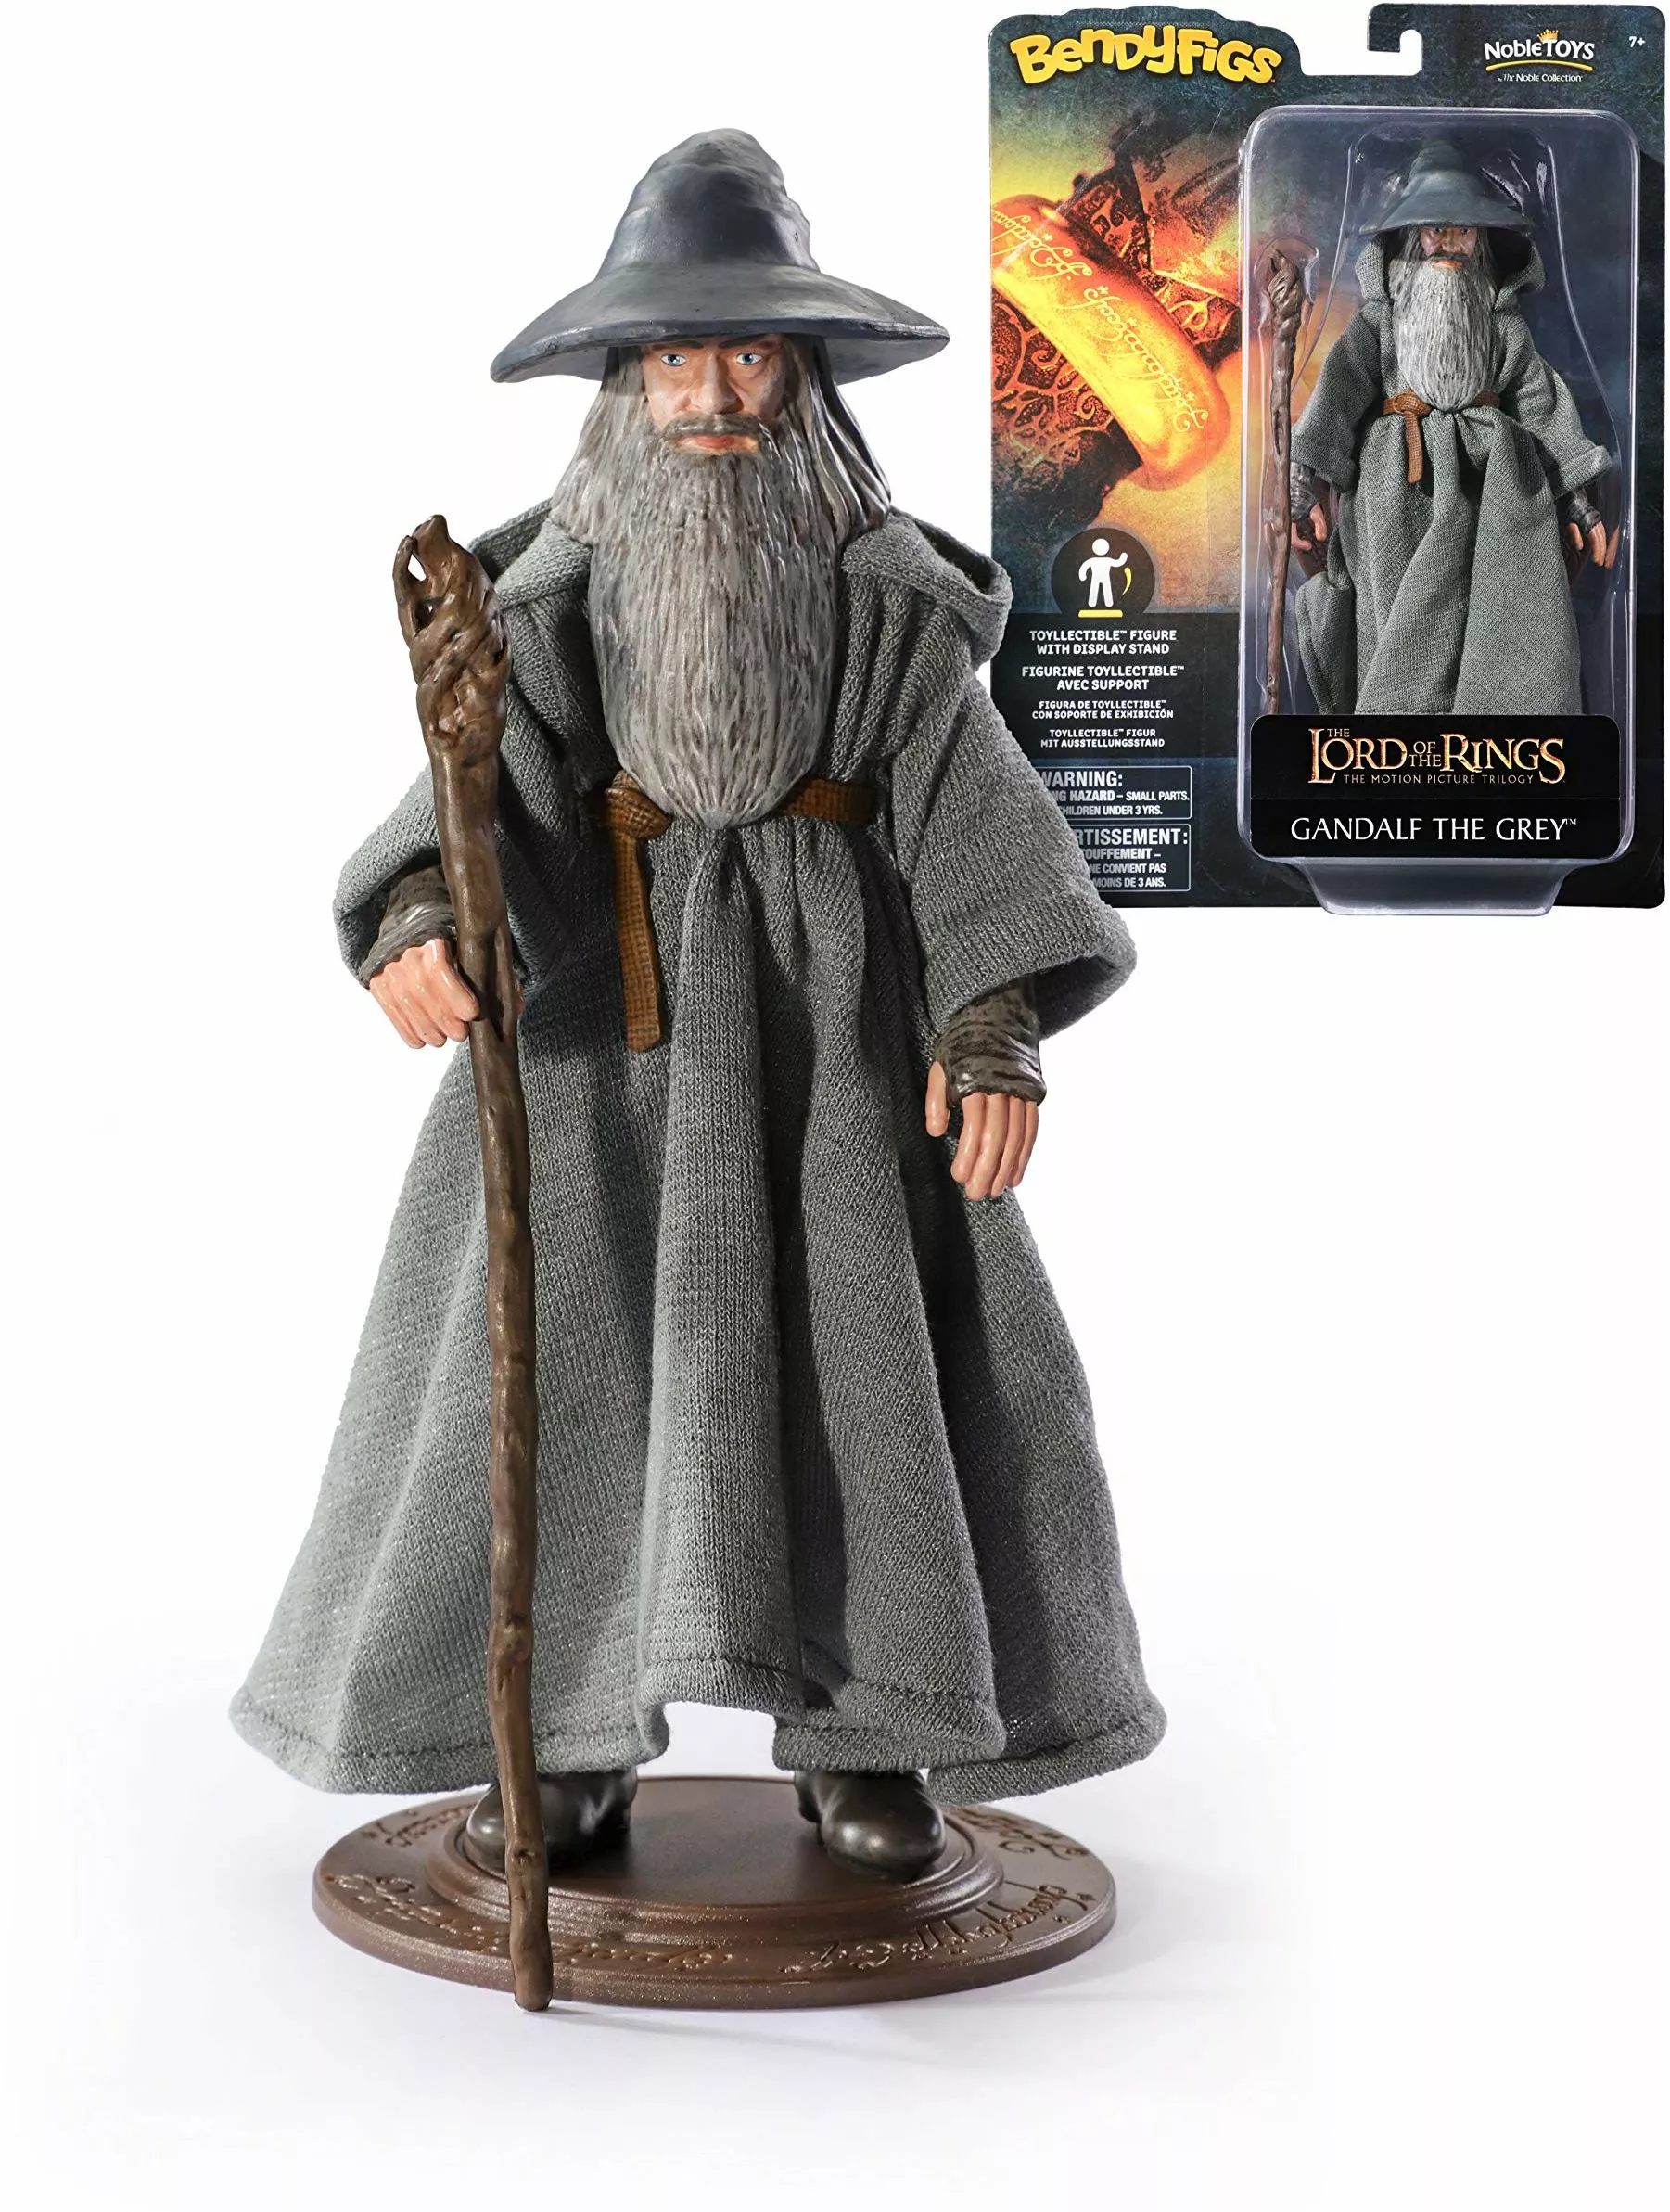 the noble collection bendyfigs gandalf officially licensed 19cm lord of the rings bendable toy posable collectable doll